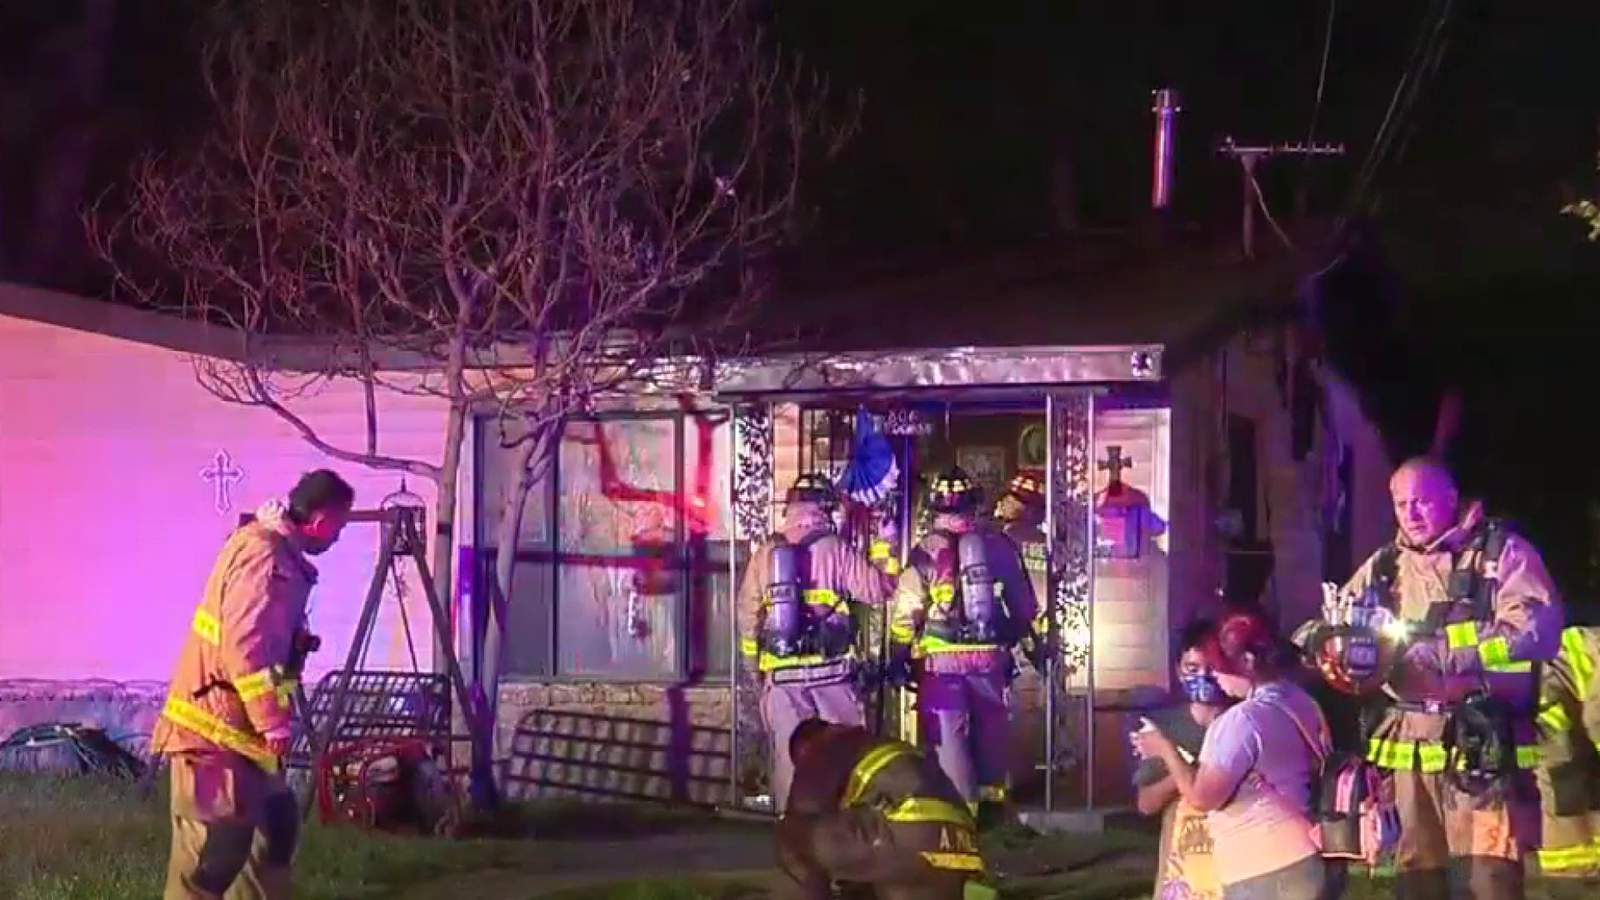 Firefighter injured in South Side house fire, officials say